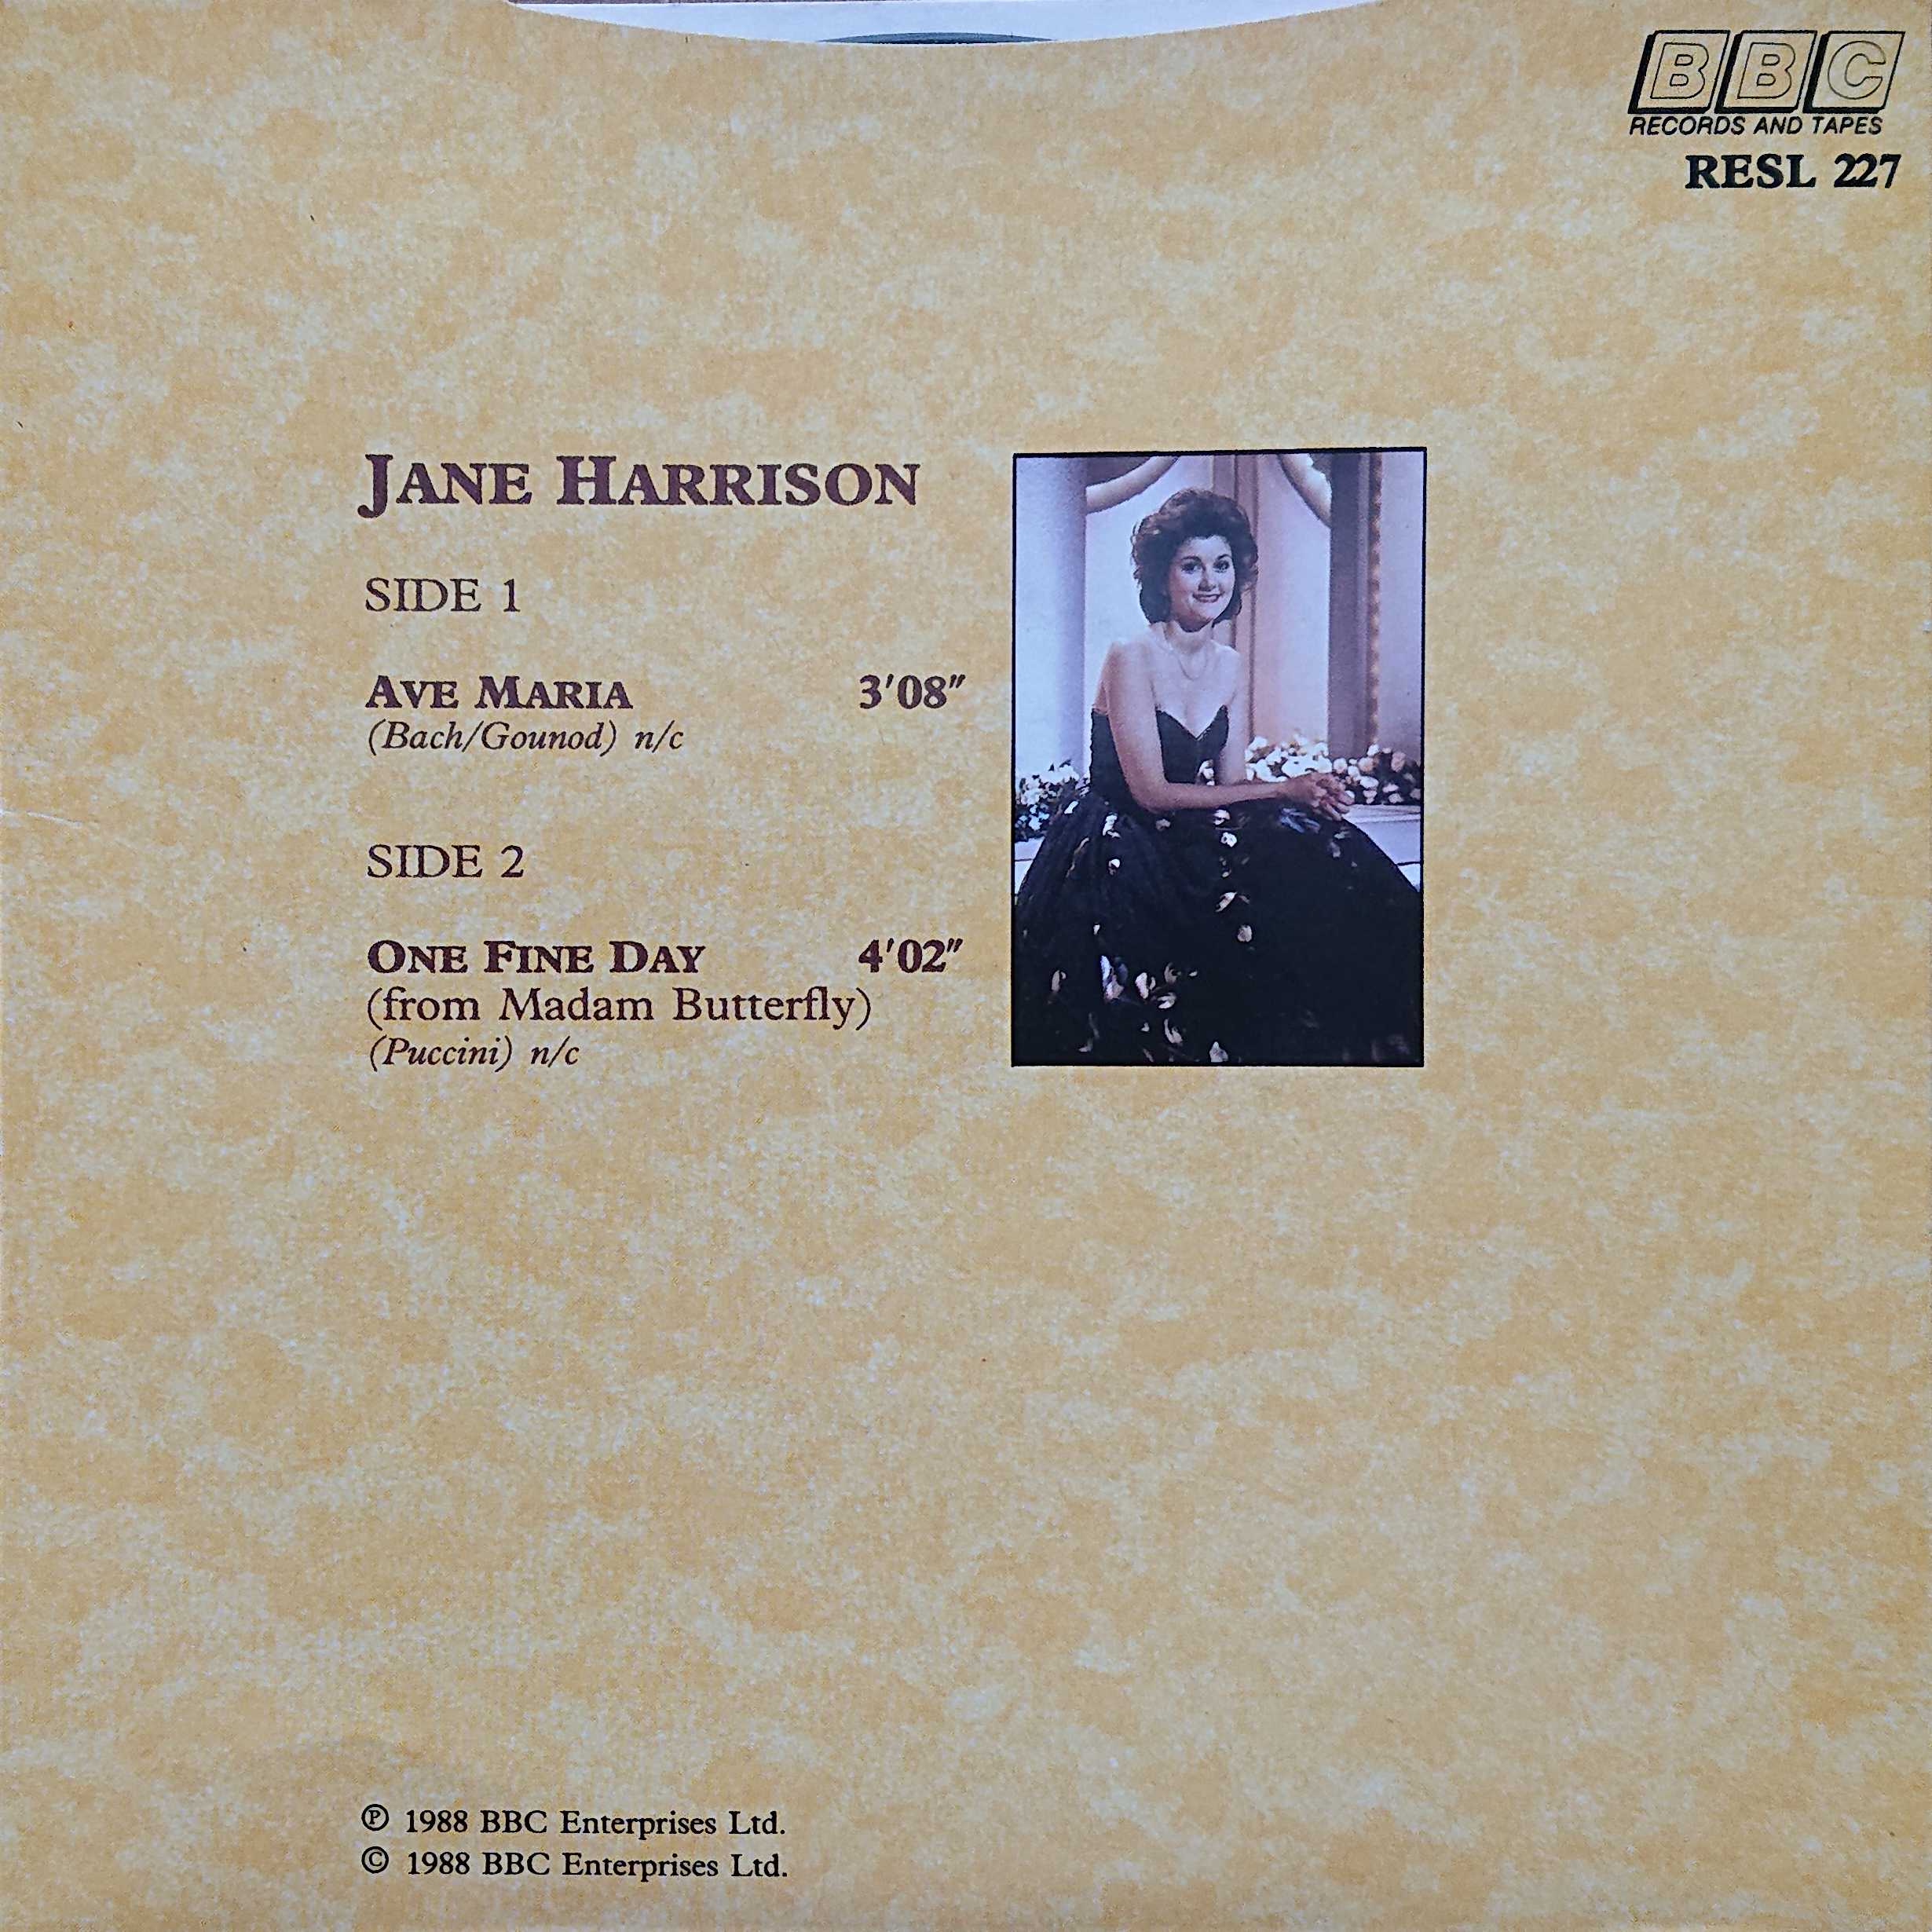 Picture of DJRESL 227 Ave Maria by artist Jane Harrison from the BBC records and Tapes library